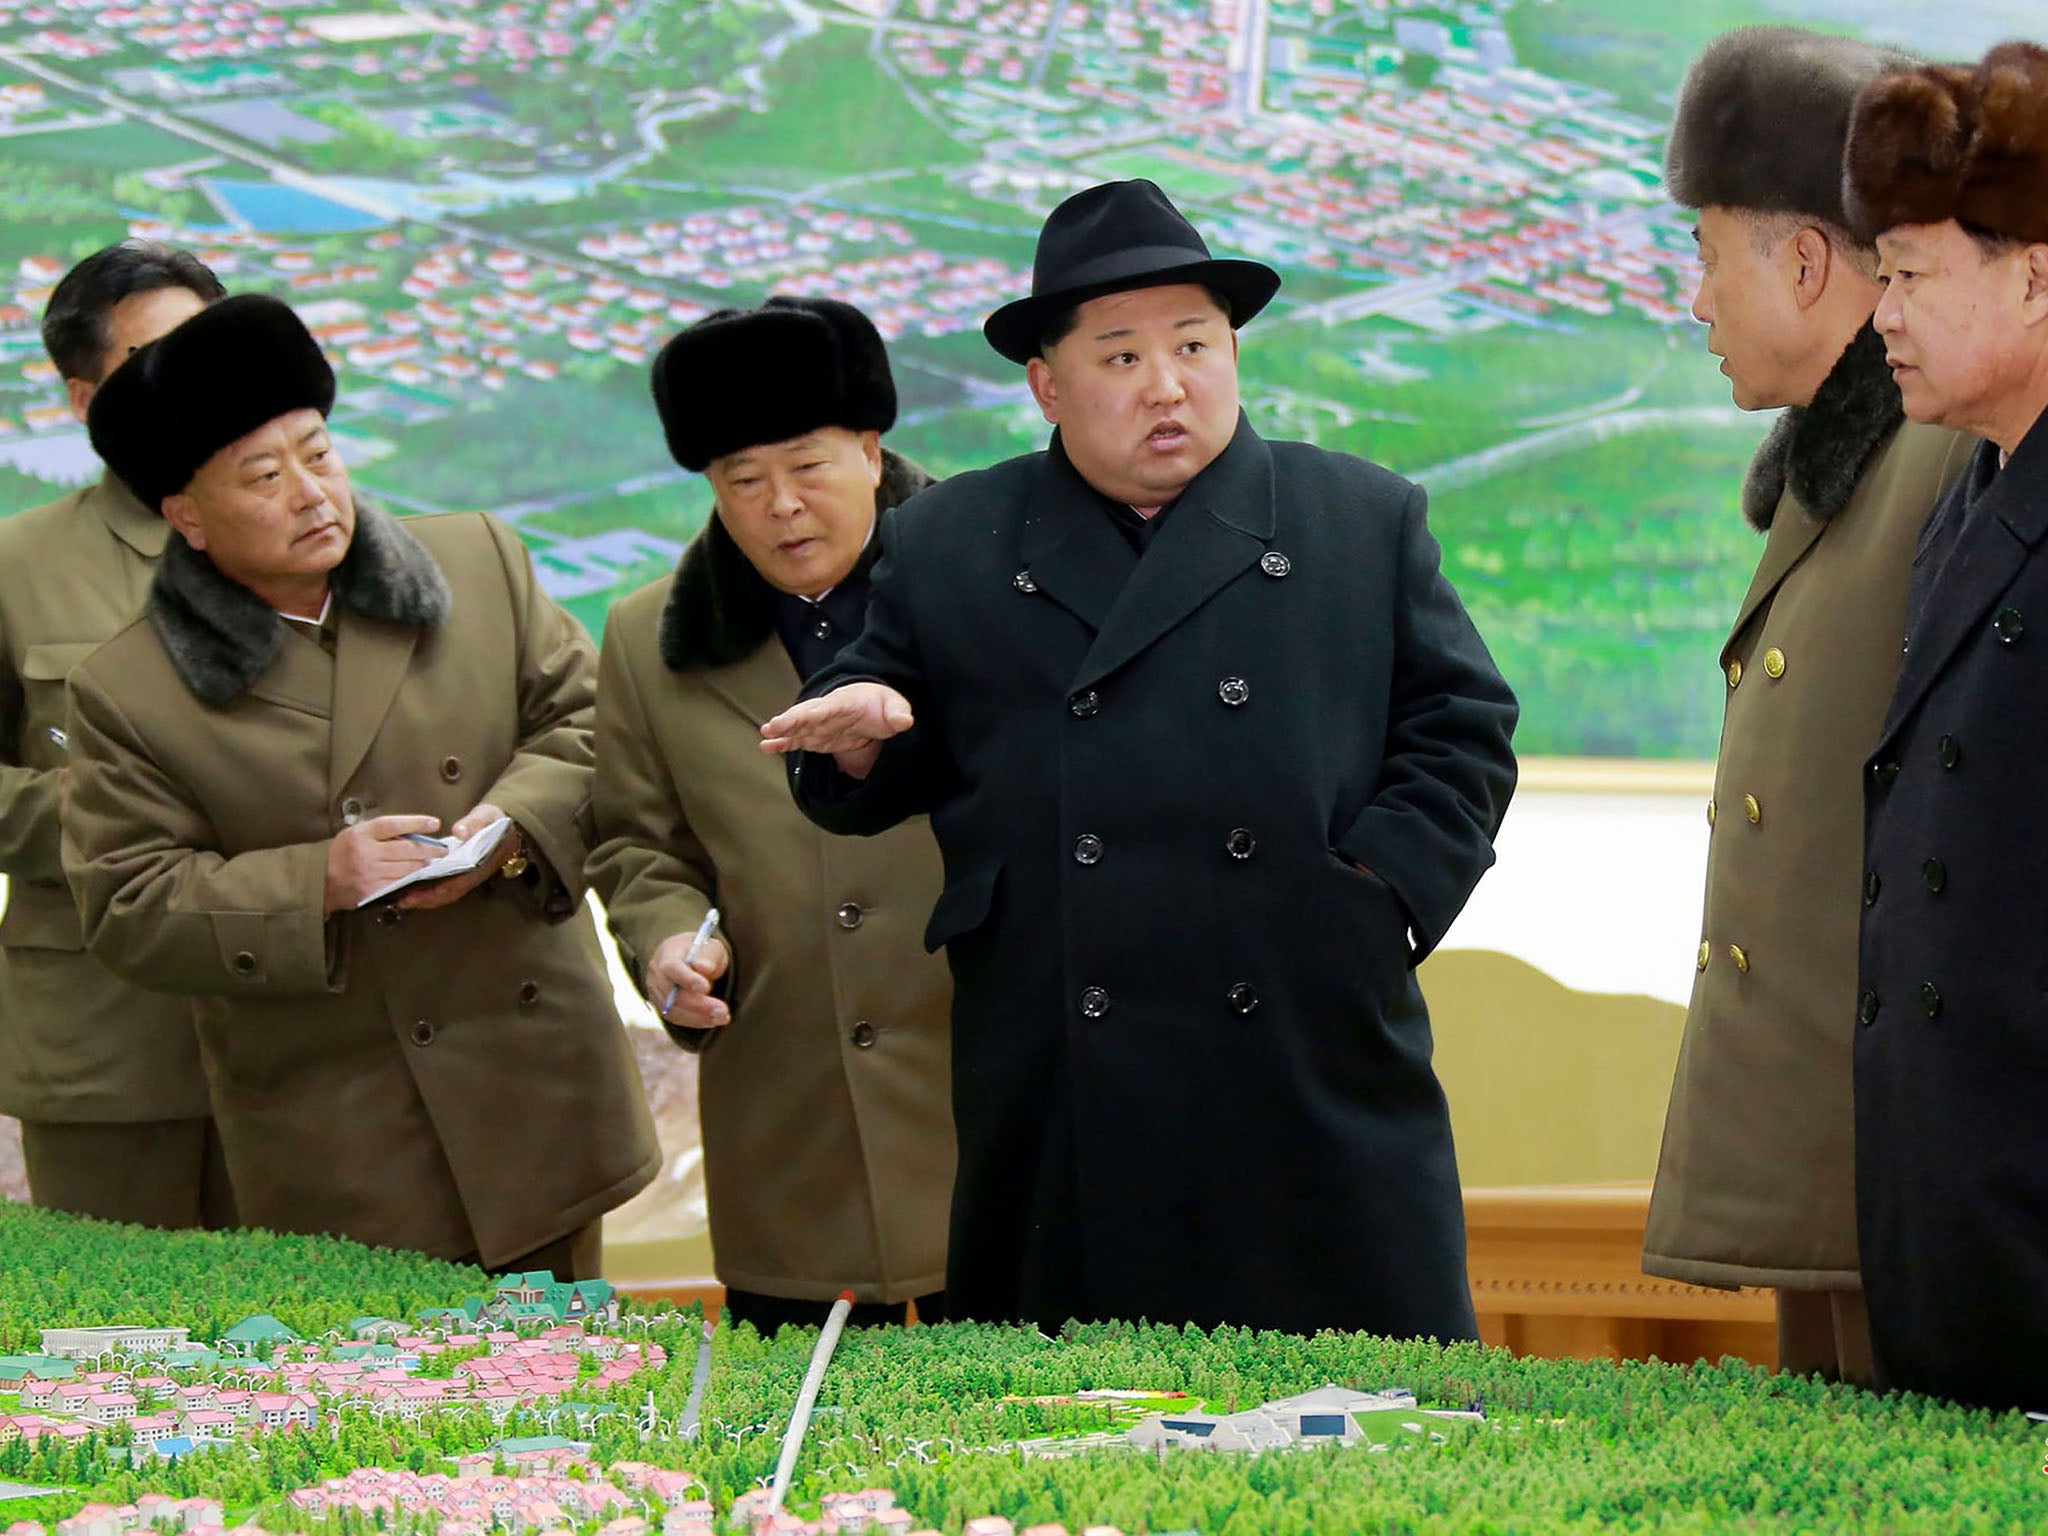 Kim Jong-un has so far shown no signs of reducing his country's nuclear programme